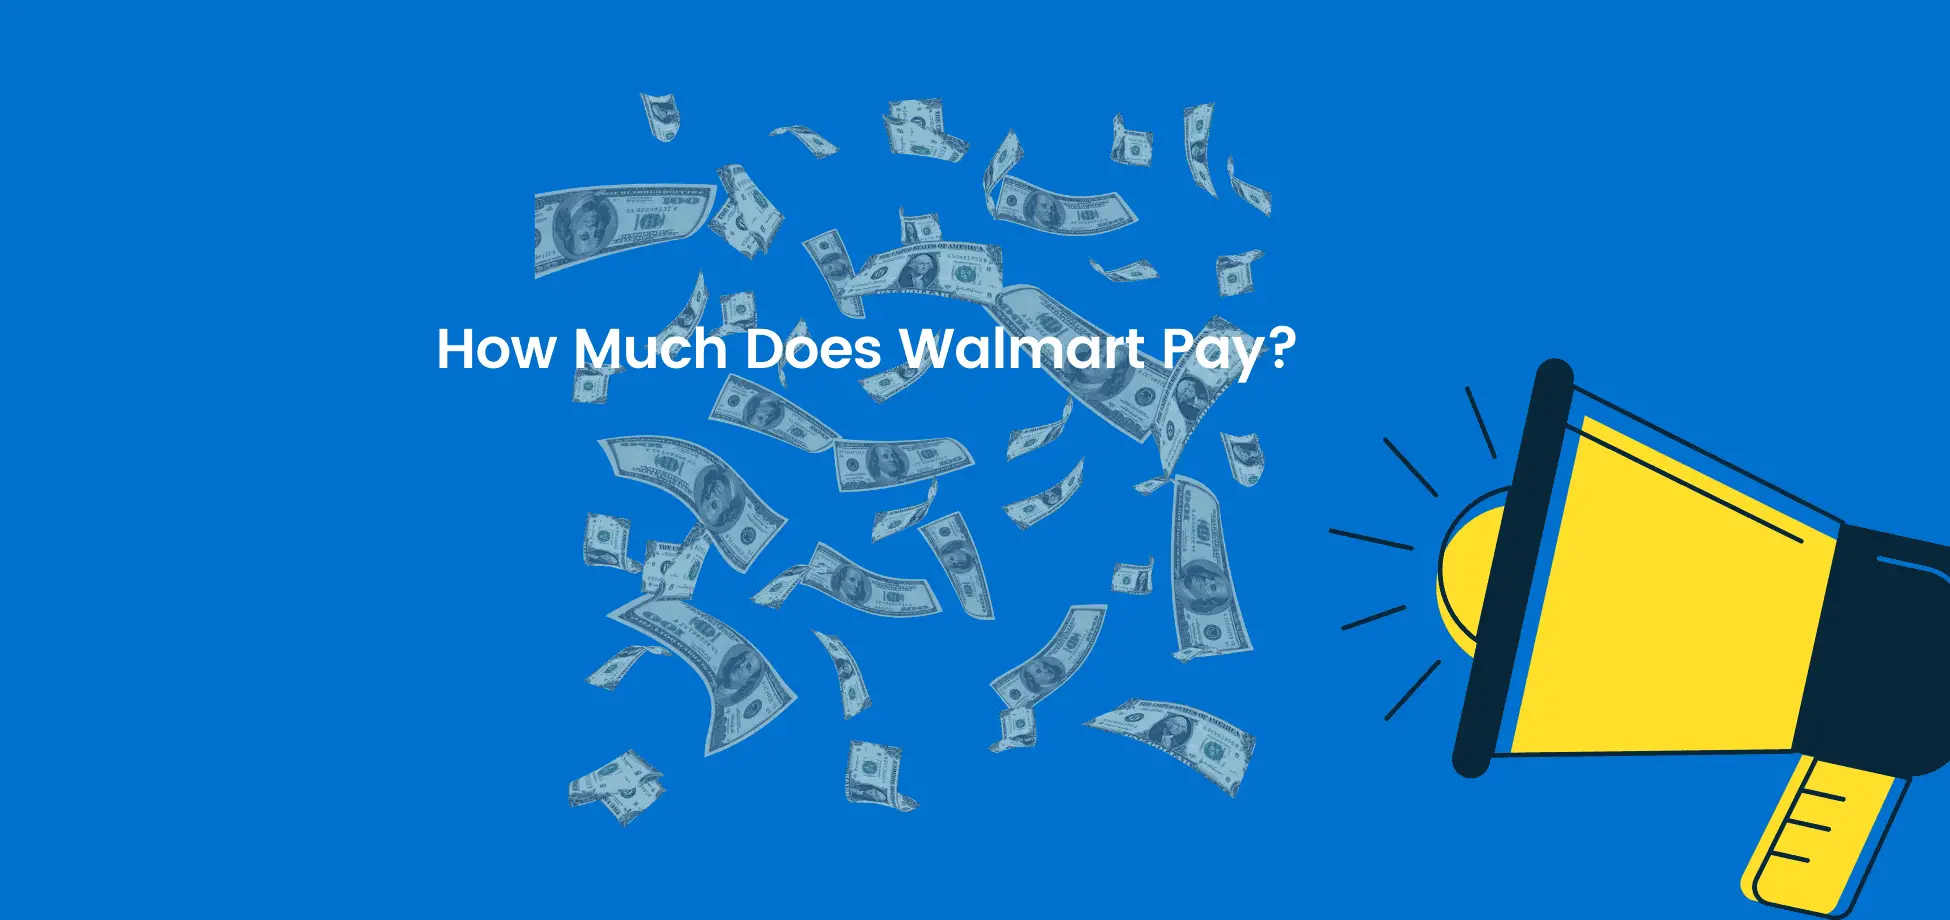 How much does Walmart pay? Currently, it pays its hourly employees a lower starting pay than Amazon, Target, and Costco.